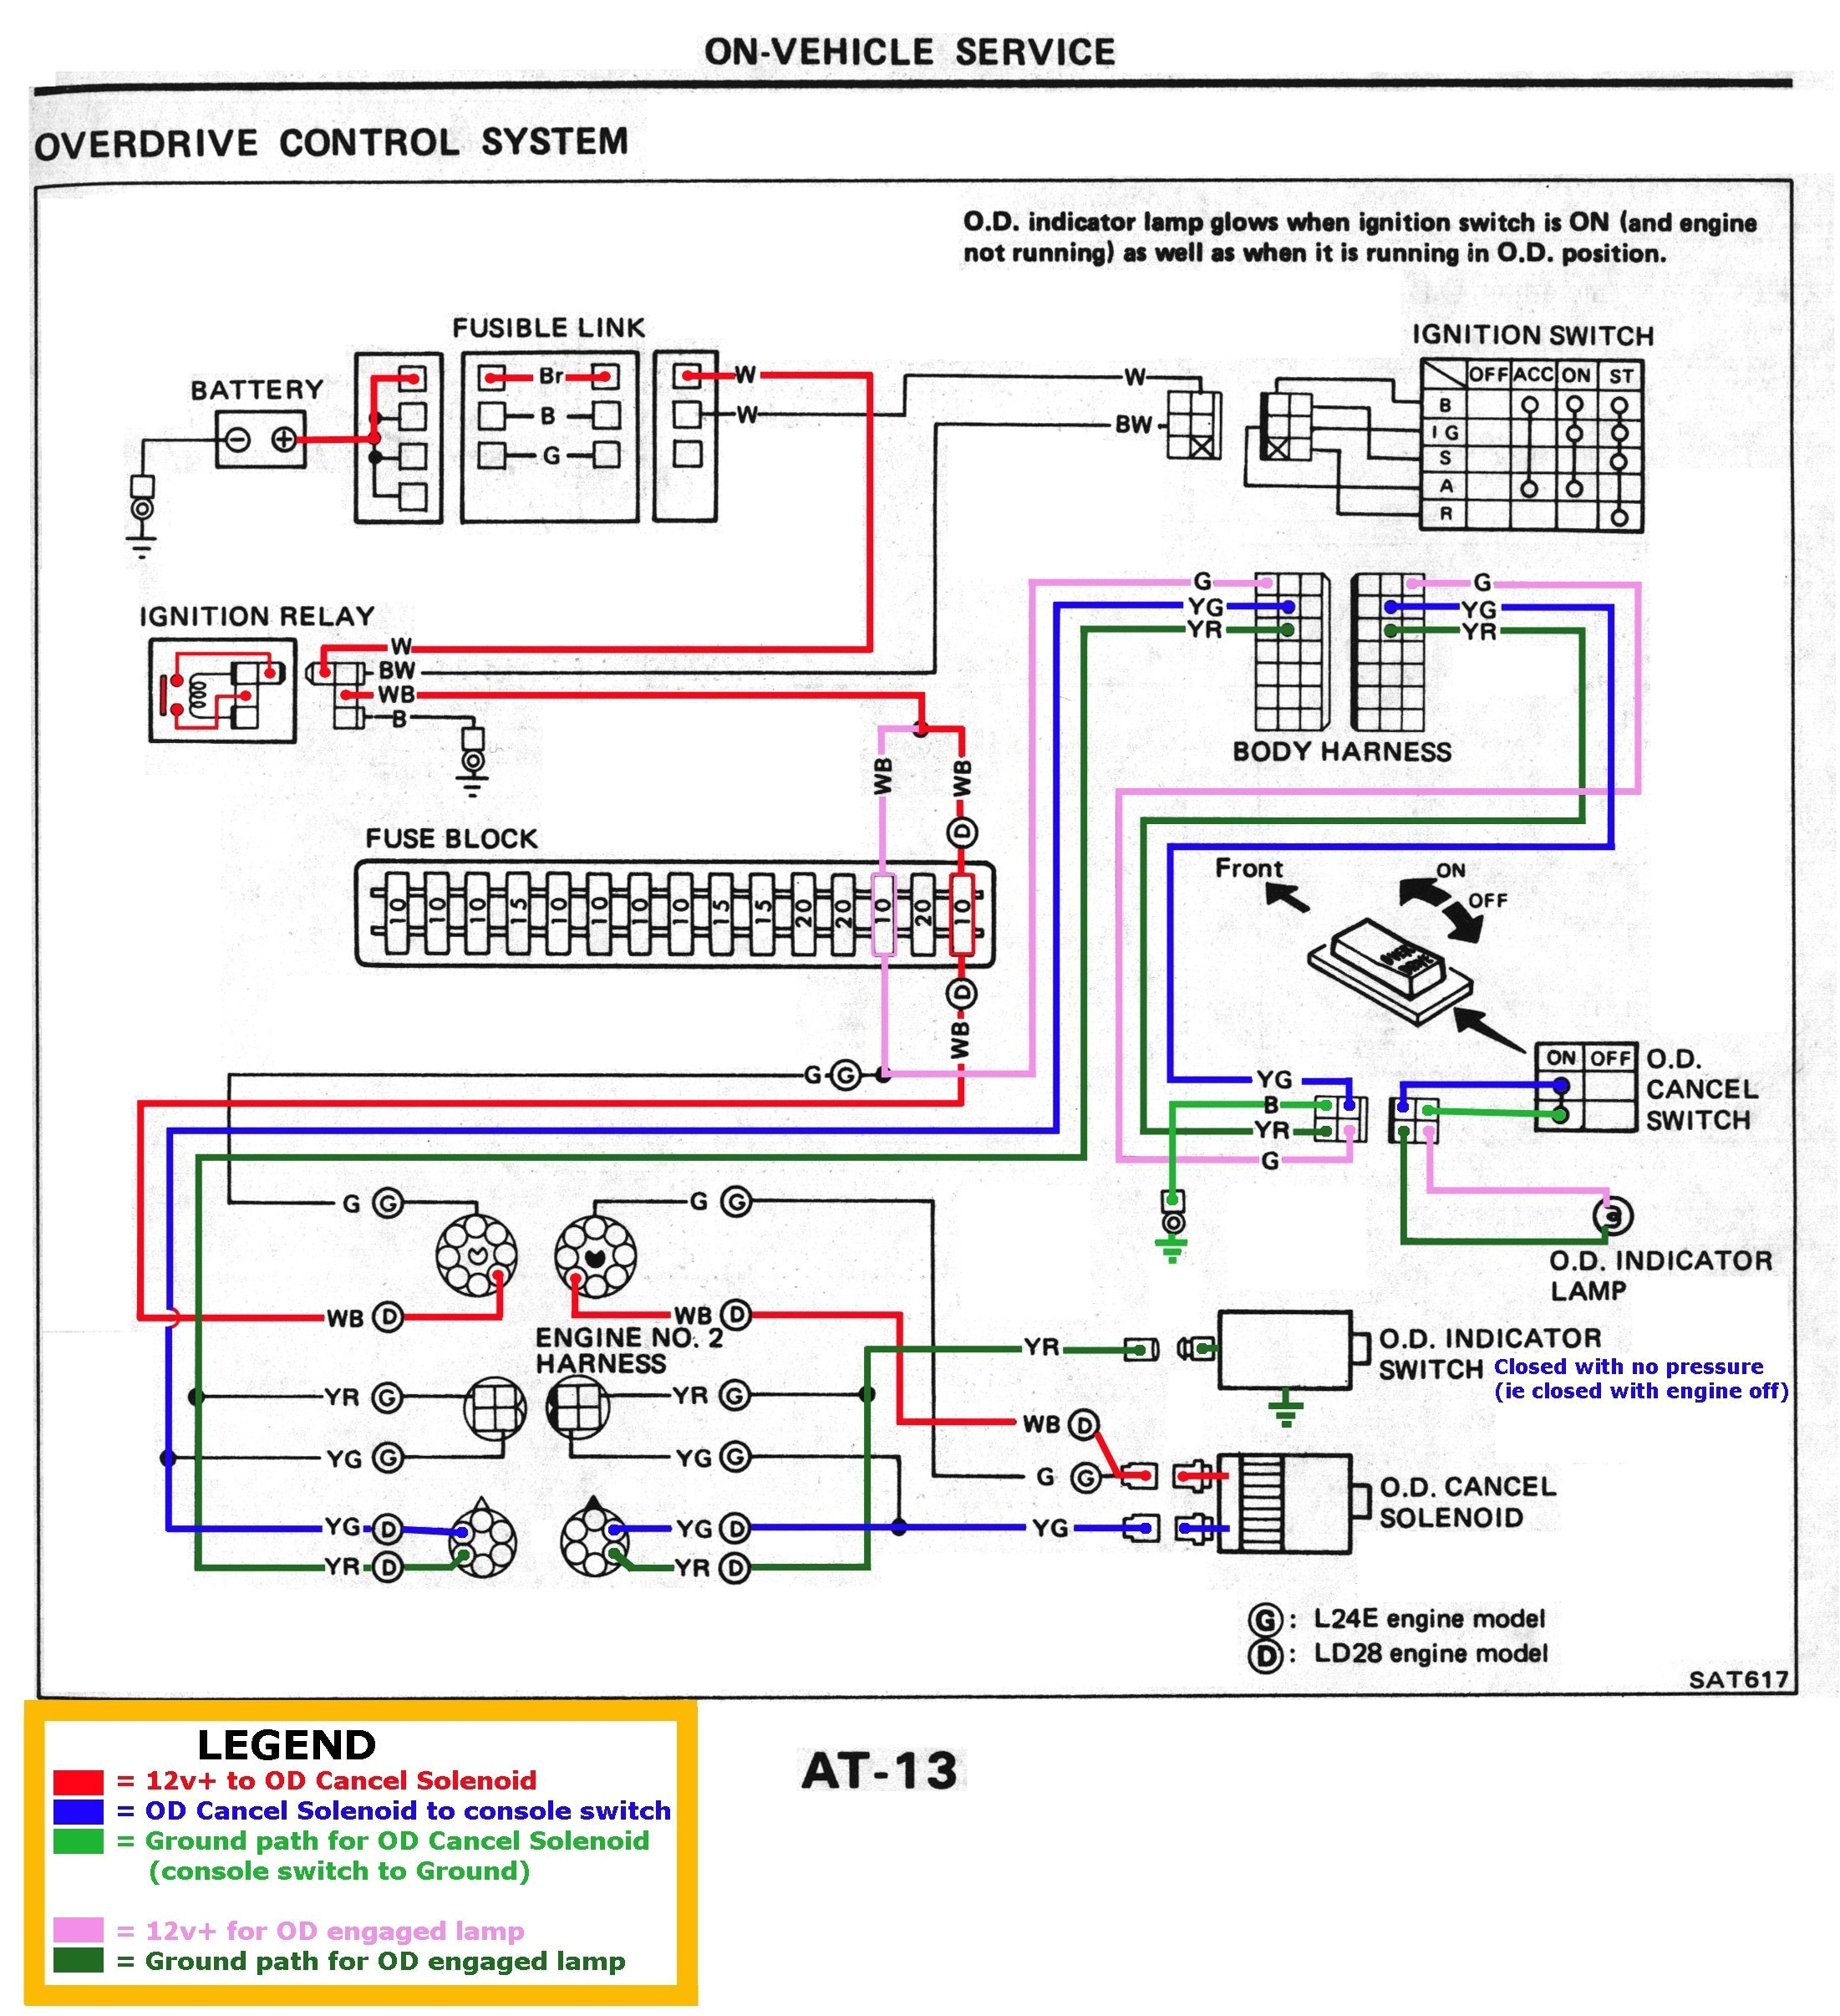 Hilux Wiring Diagram Hilux Wiring Diagram Best Of Hilux Ignition Switch Wiring Diagram